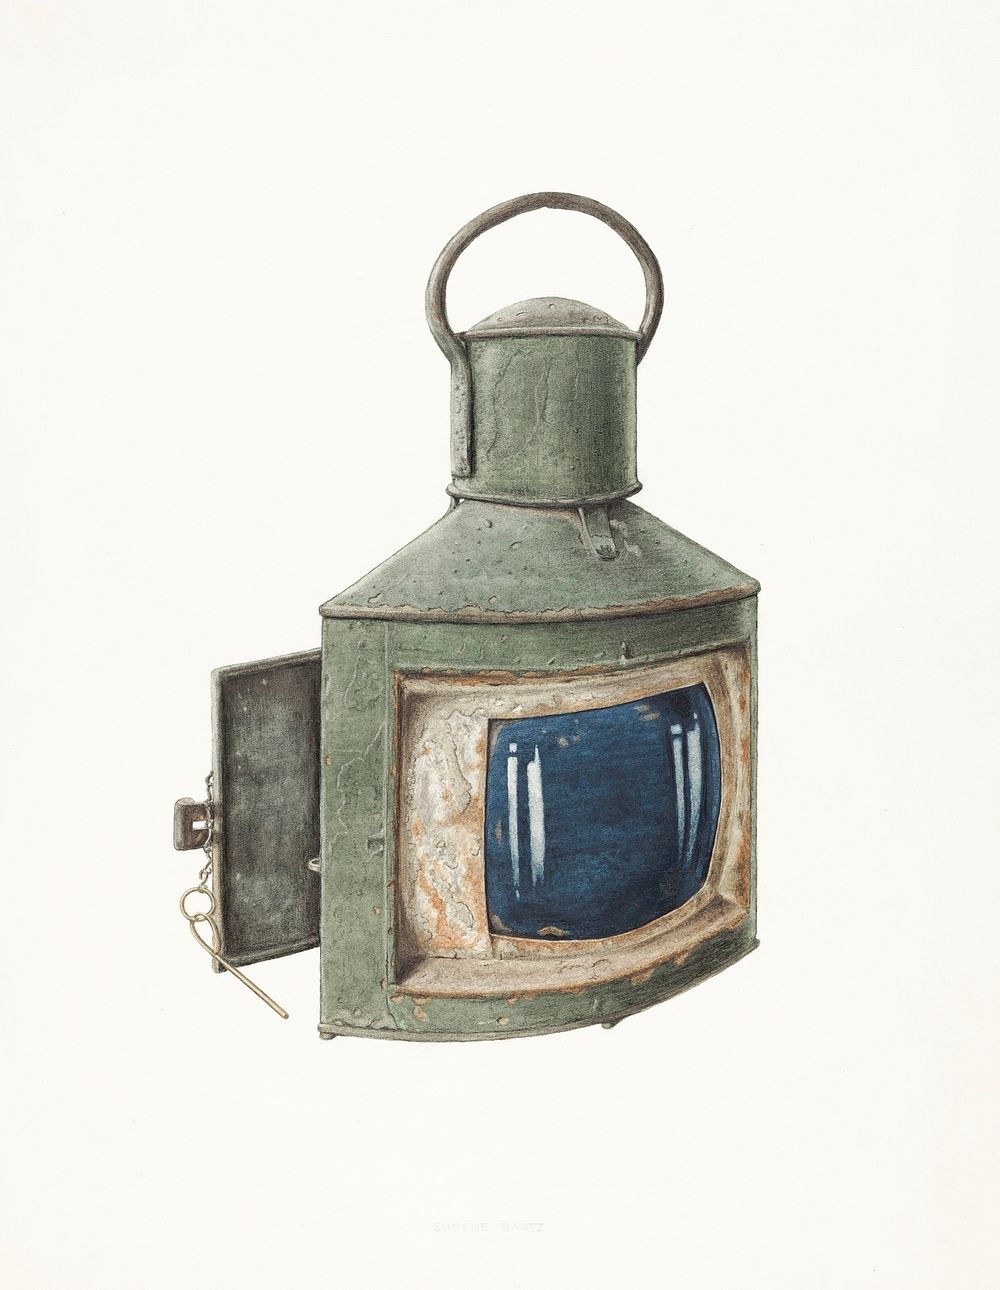 Starboard Light (1935&ndash;1942) by Eugene Bartz. Original from The National Gallery of Art. Digitally enhanced by rawpixel.